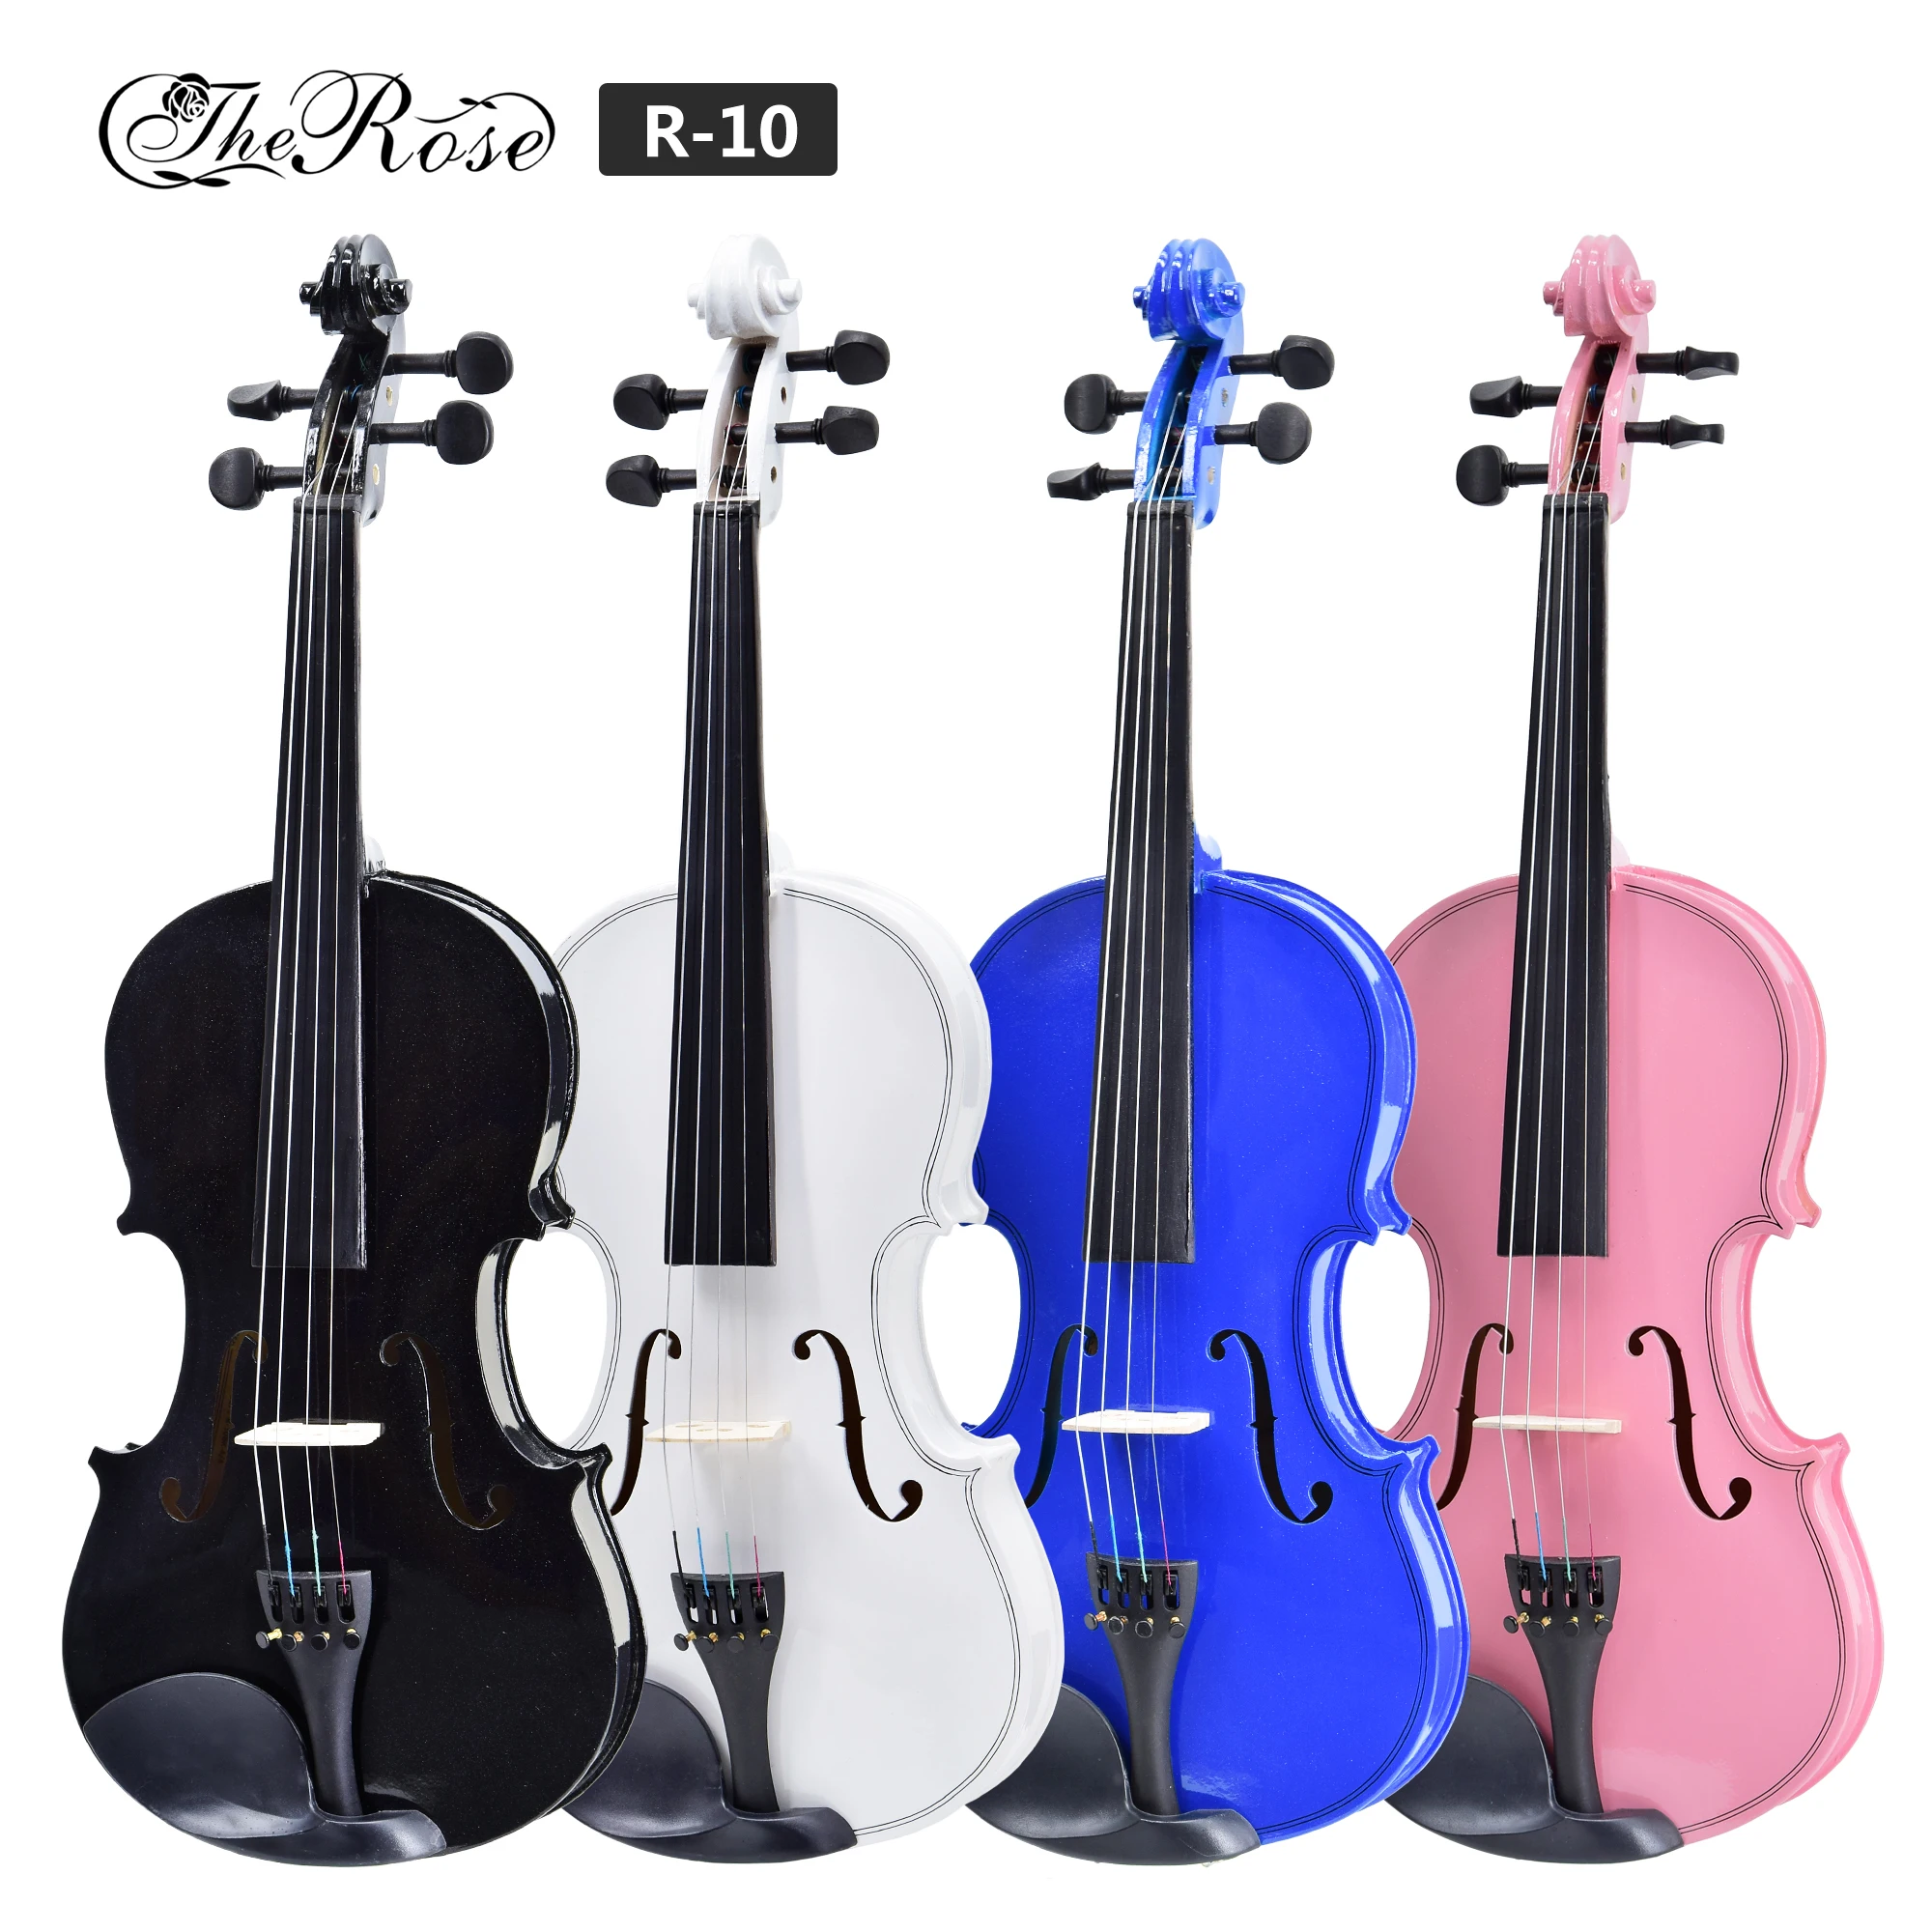 Wholesale Wholesale good 4/4 maple wood violin for sell From m.alibaba.com